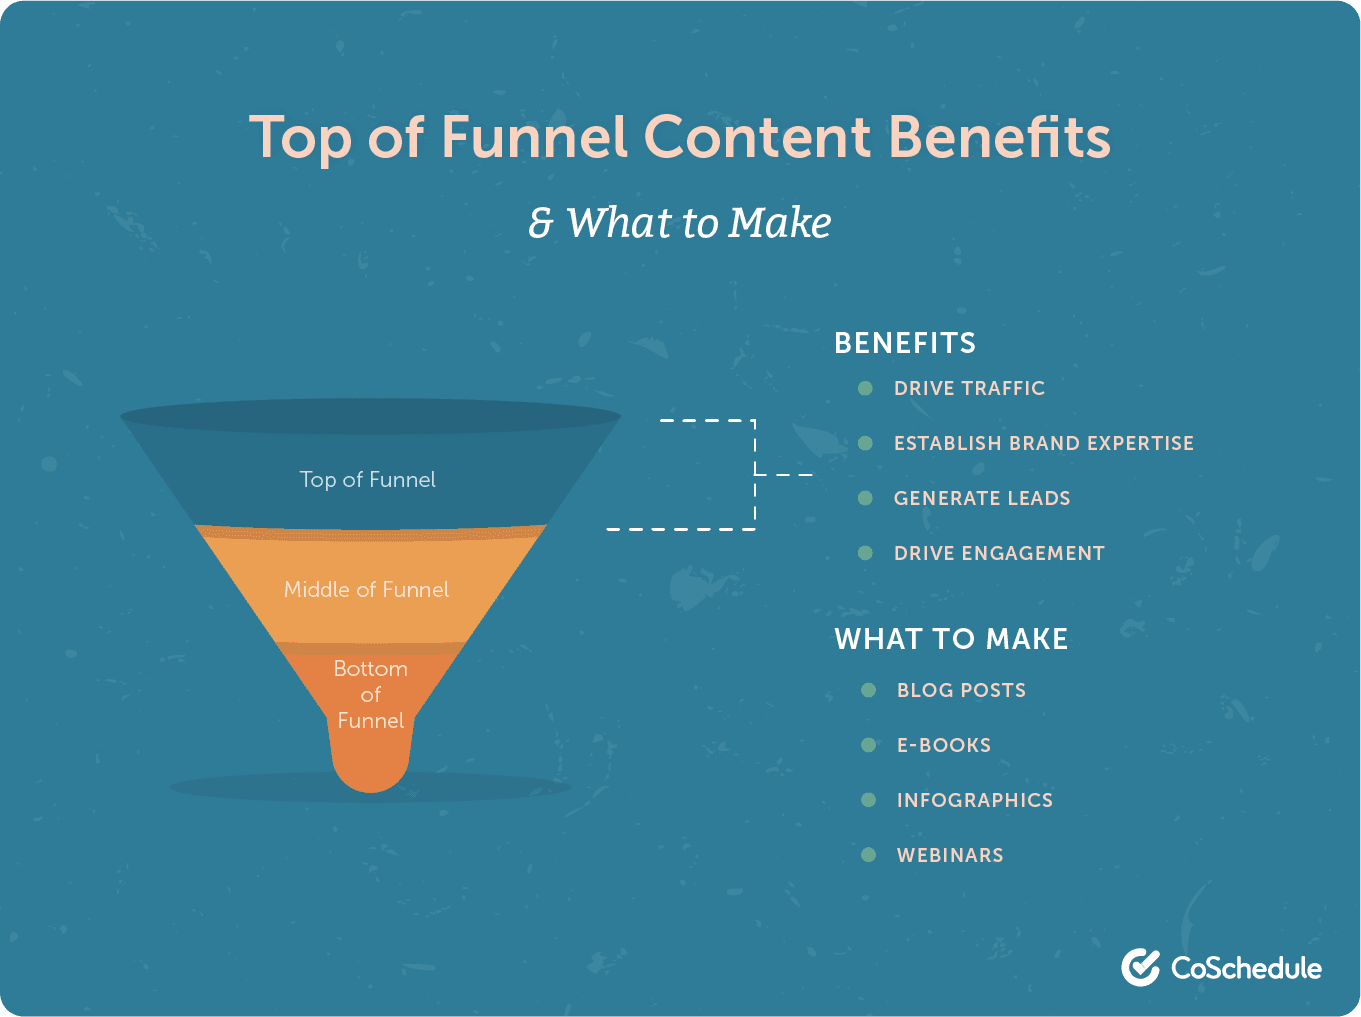 Top of funnel content